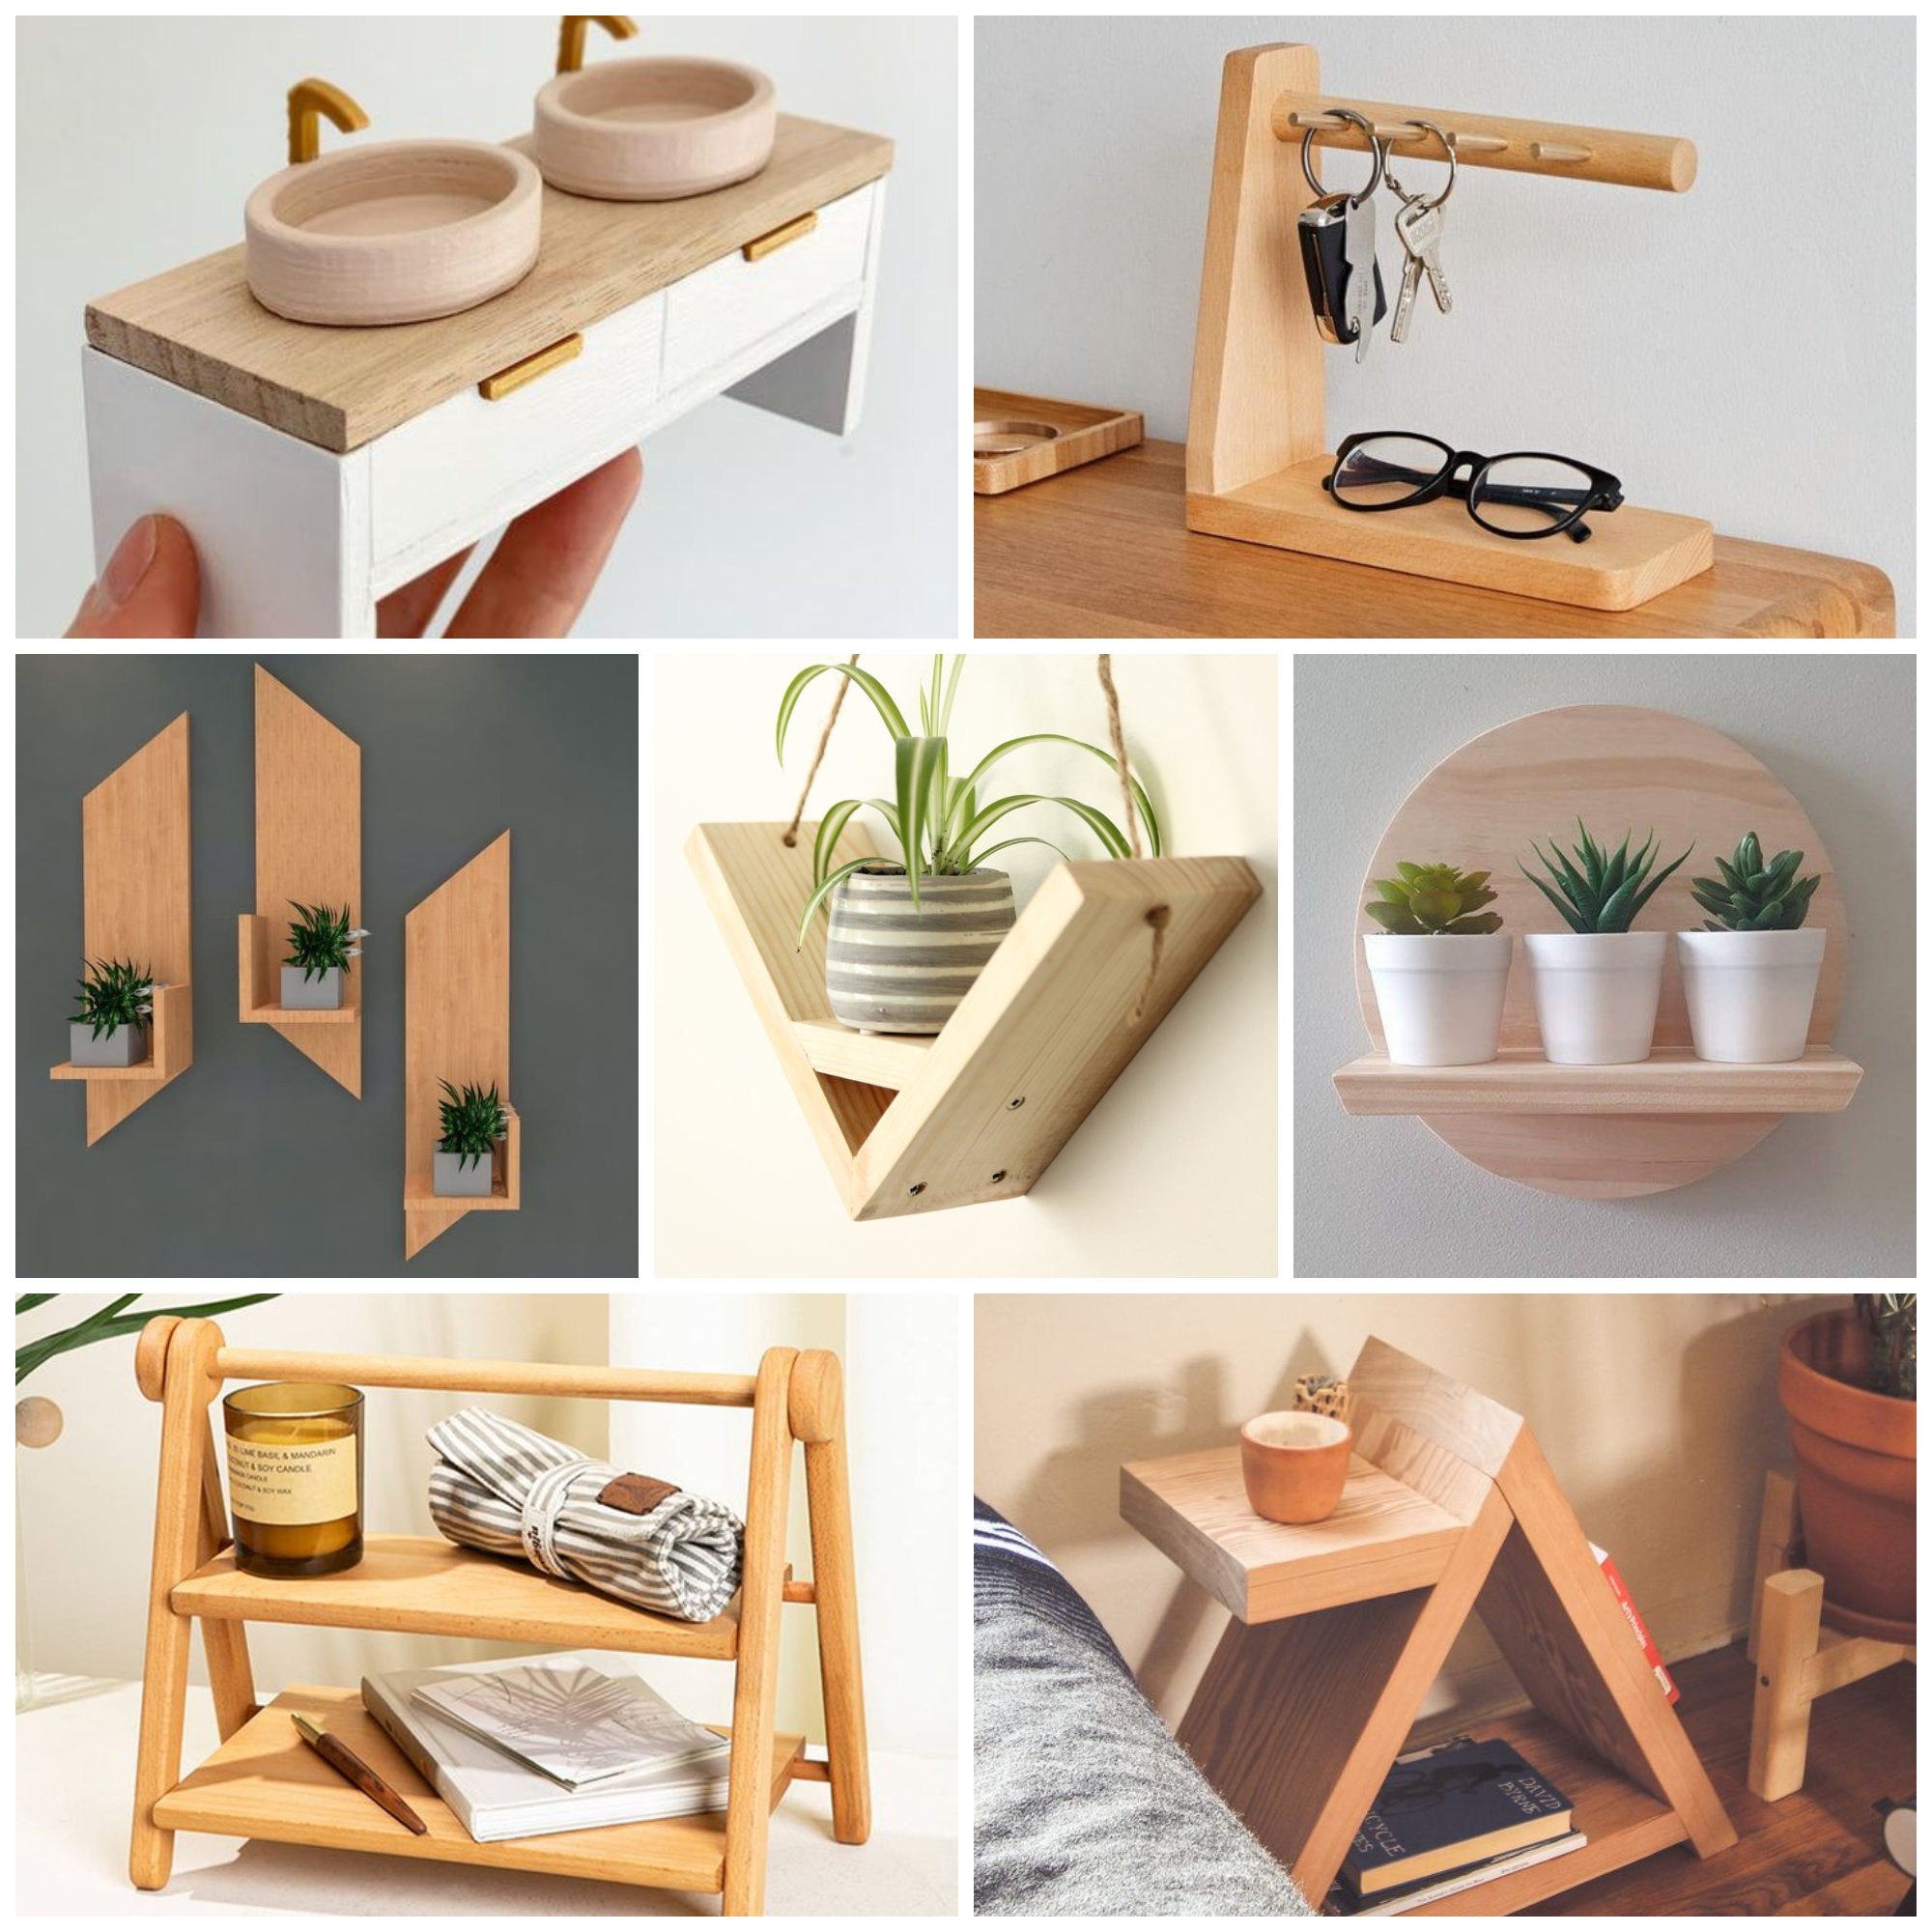 Stunning Woodworking Project Ideas